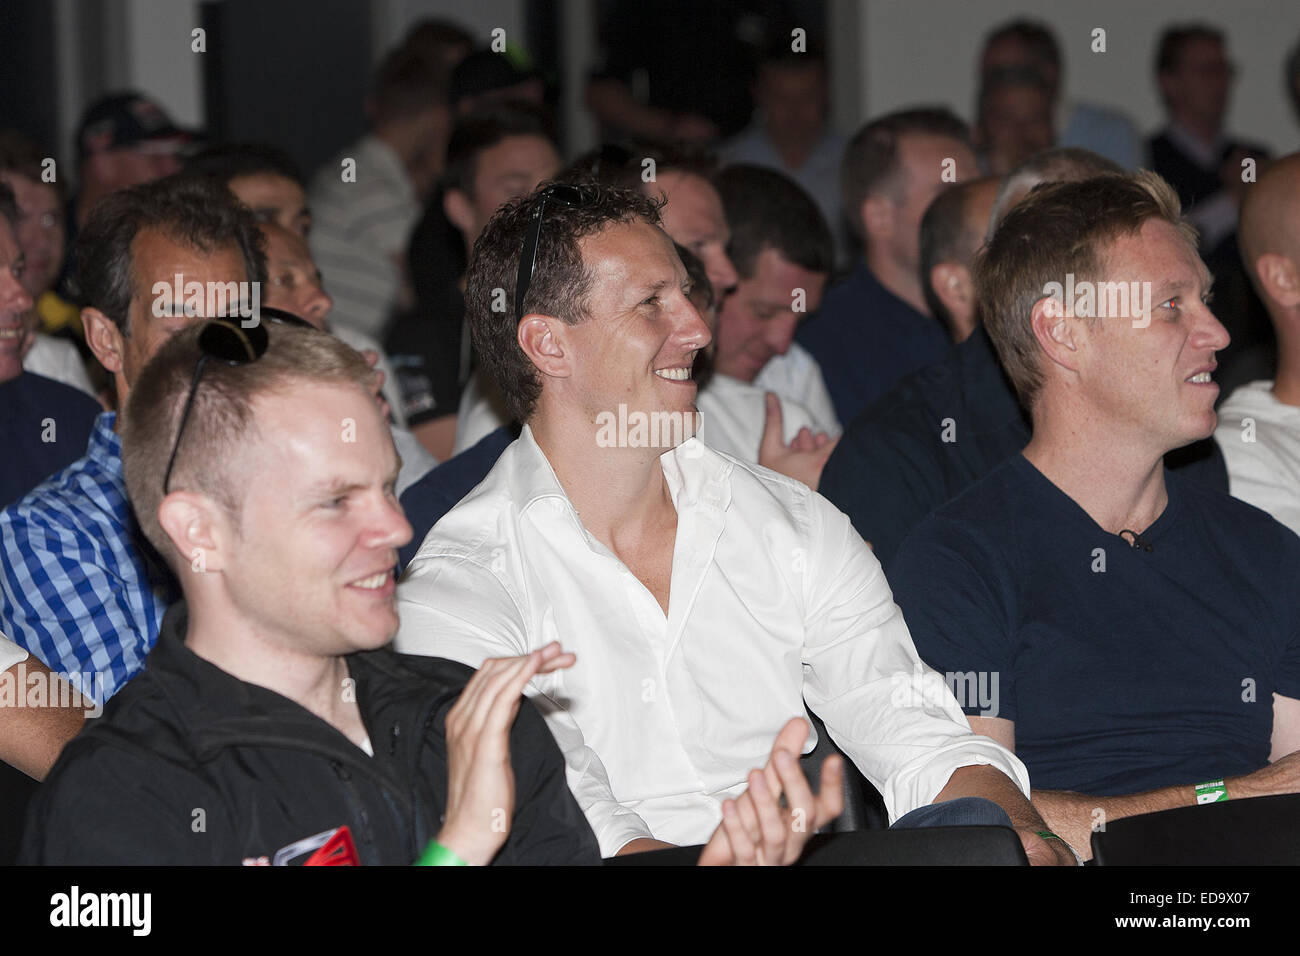 Strictly Come Dancing's Brendan Cole taking part at Go-Karting at the Mercedes-Benz World at the famous Brooklands circuit in Surrey, raising money for the Henry Surtees Foundation.  Featuring: Brendan Cole Where: Brooklands, United Kingdom When: 01 Jul 2 Stock Photo